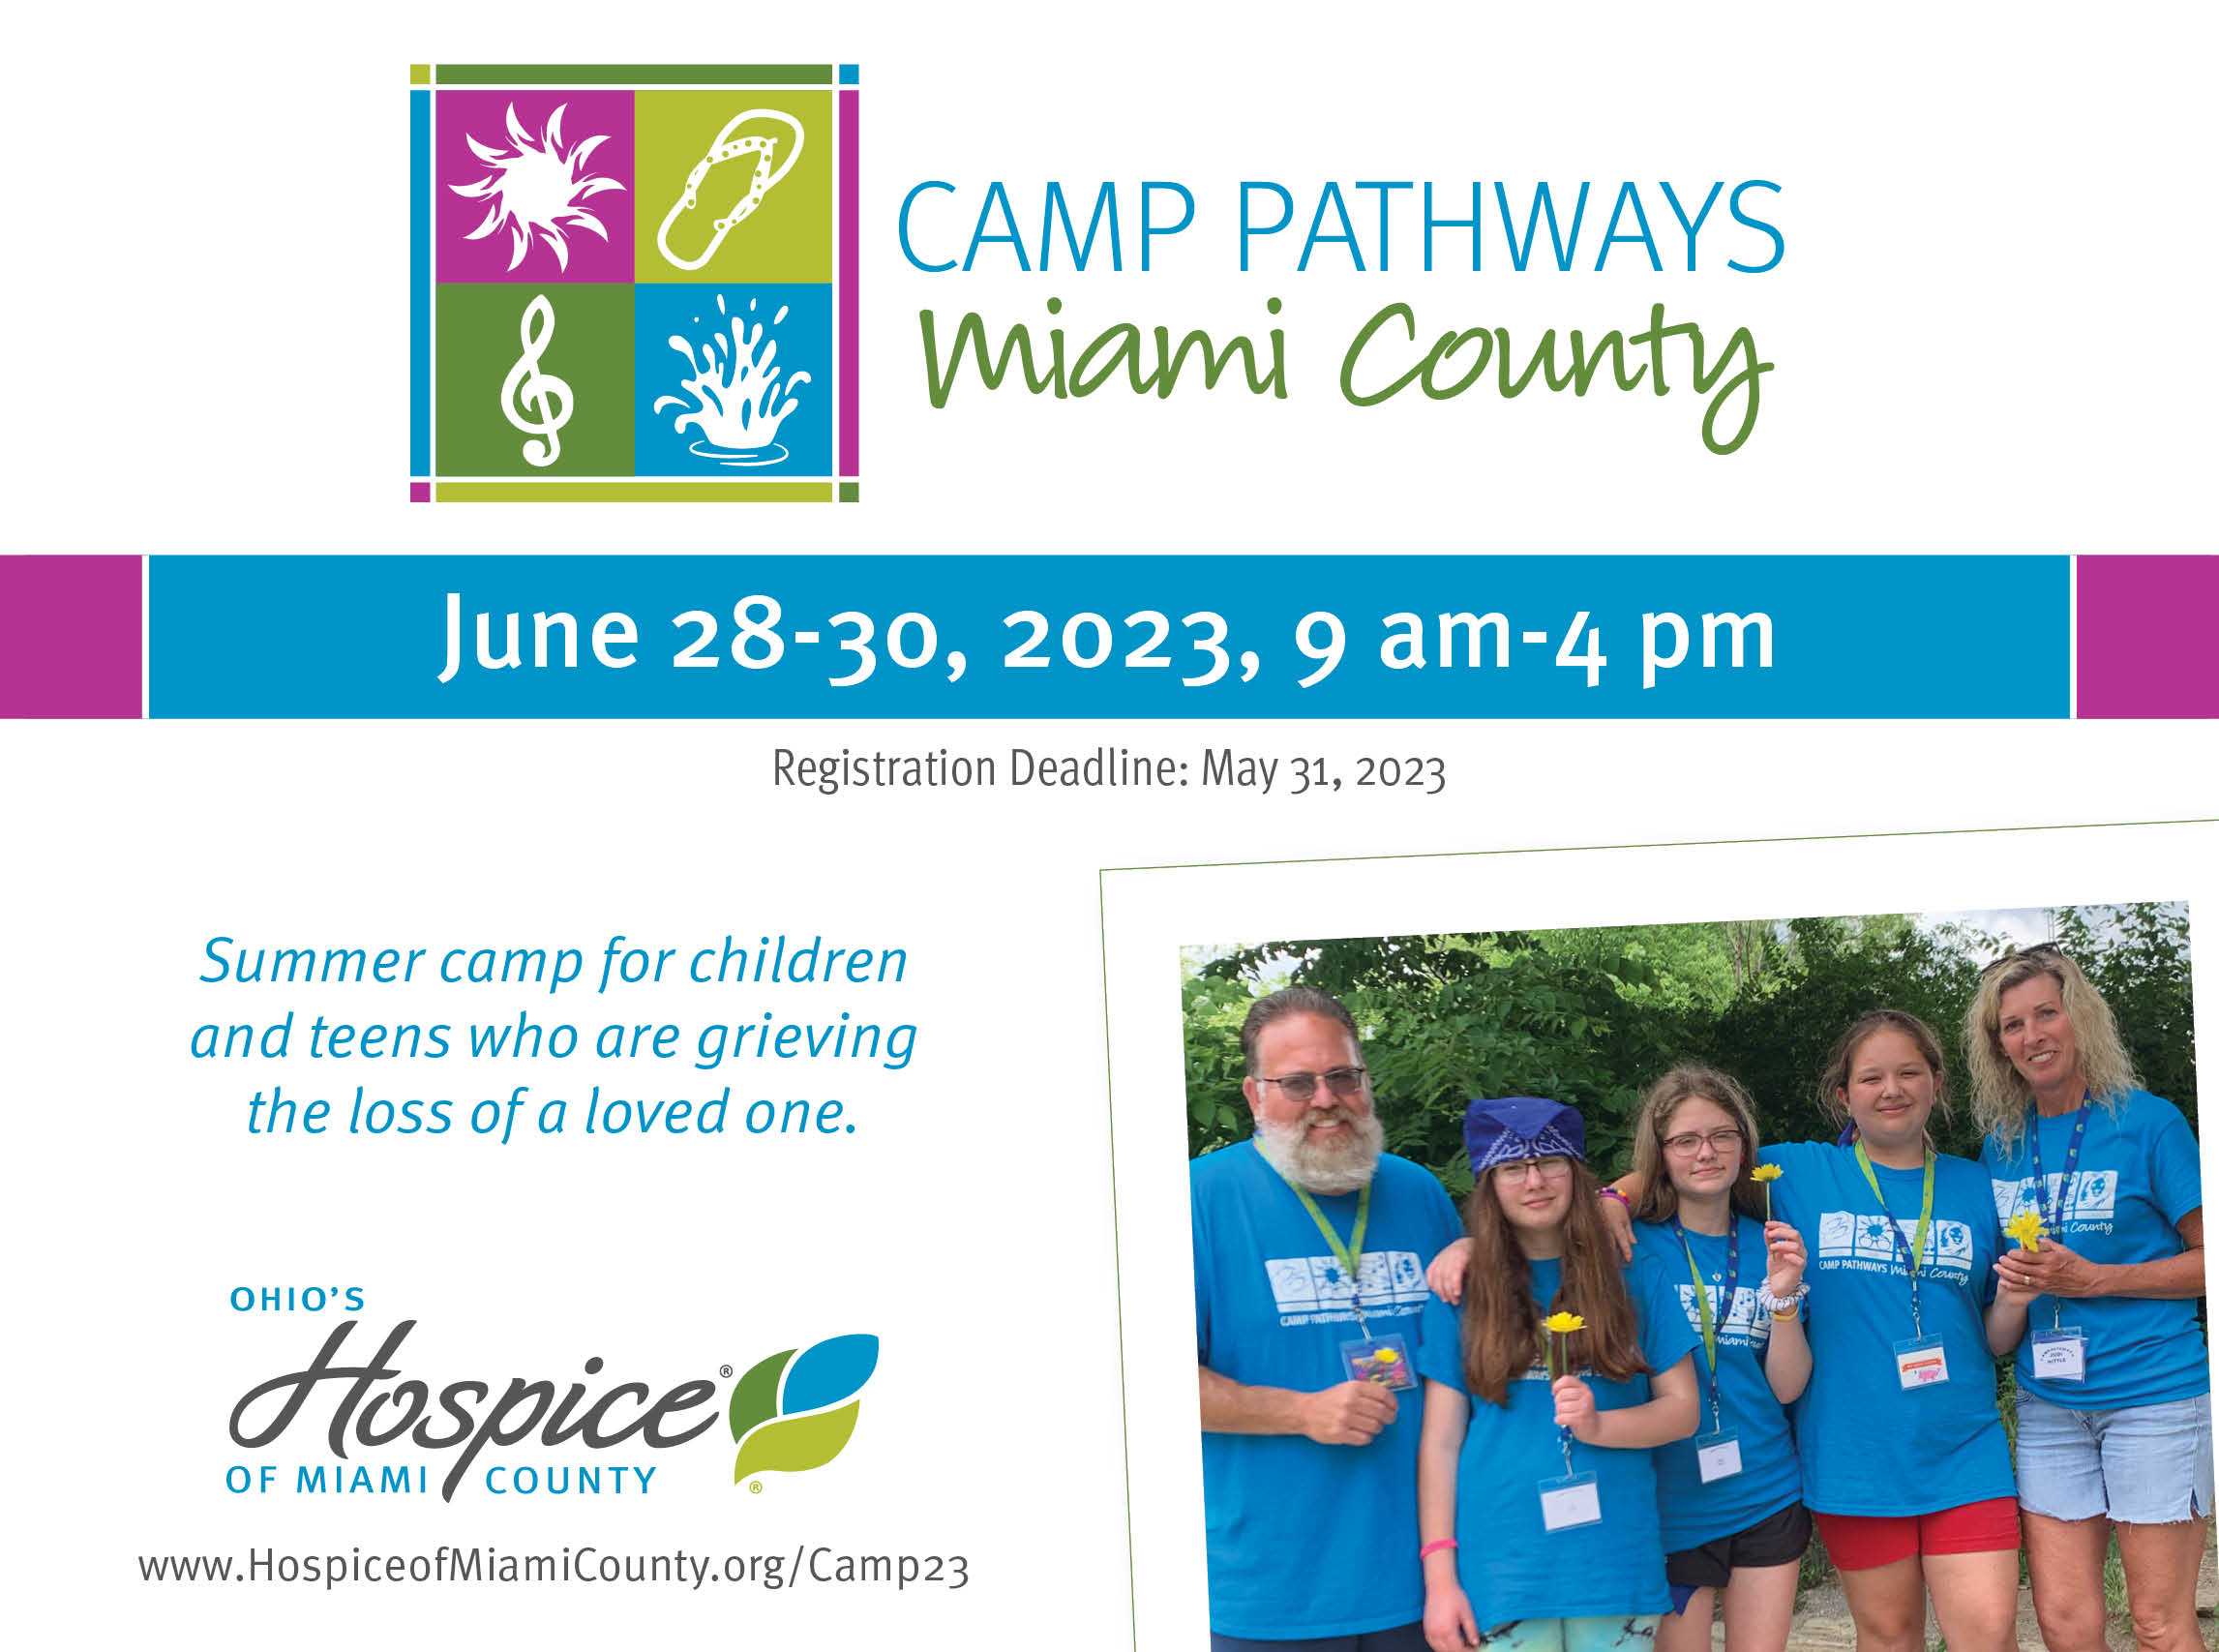 Camp Pathways: Miami County. Summer camp for children and teens who are grieving the loss of a loved one. Ohio's Hospice of Miami County